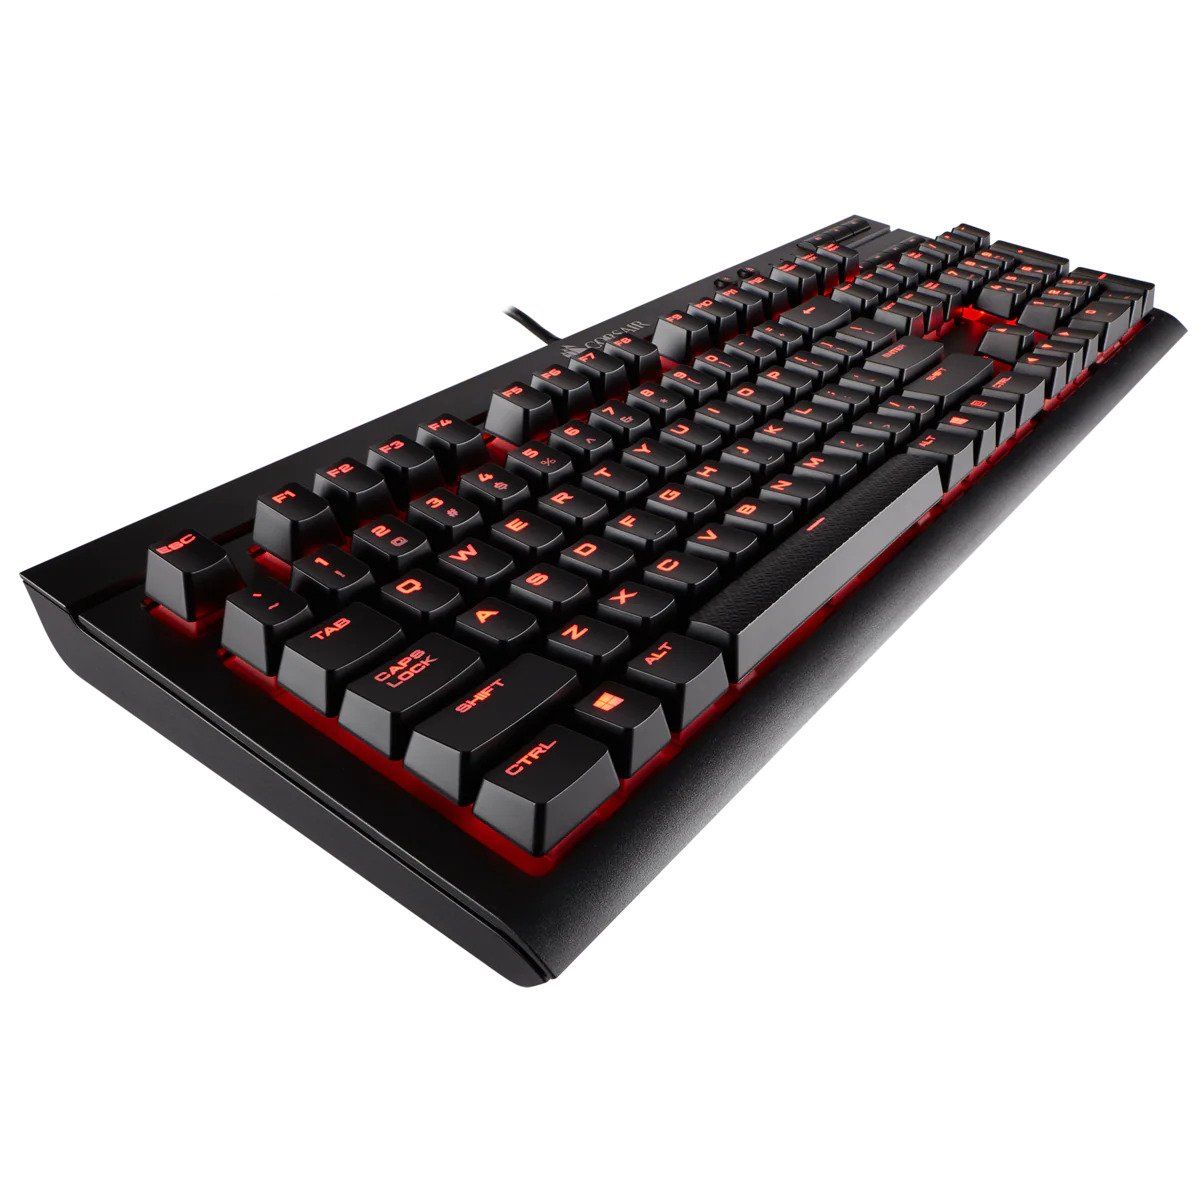 9 Amazing Cherry MX Red Keyboard for 2023